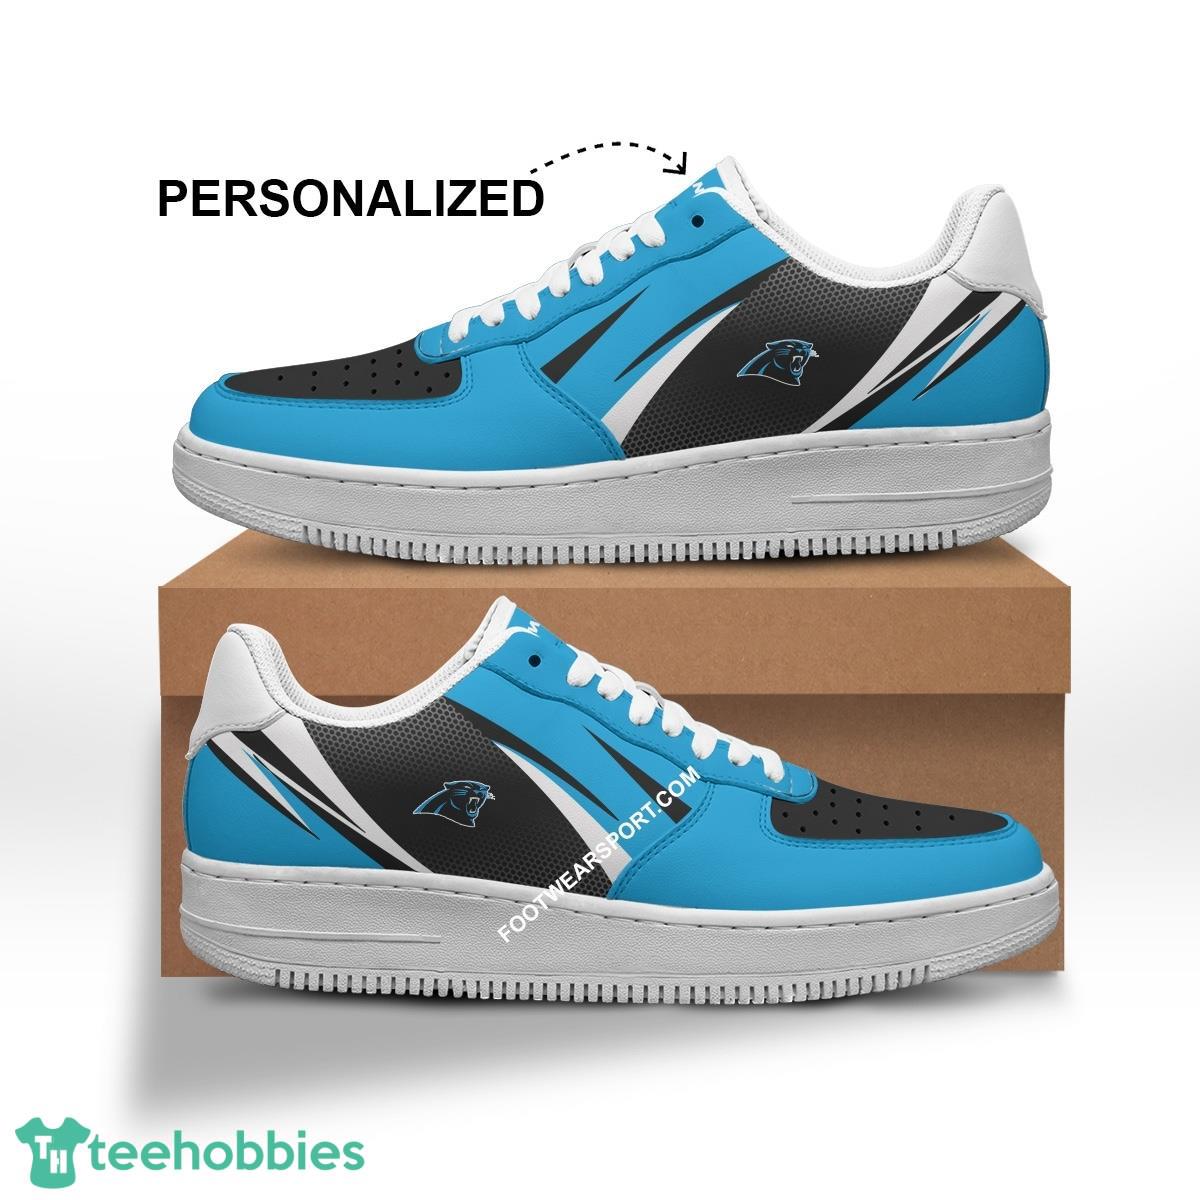 Custom Name Carolina Panthers Air Force 1 Shoes Trending Design For Fans Gift - NFL Carolina Panthers Air Force 1 Shoes Personalized Style 1